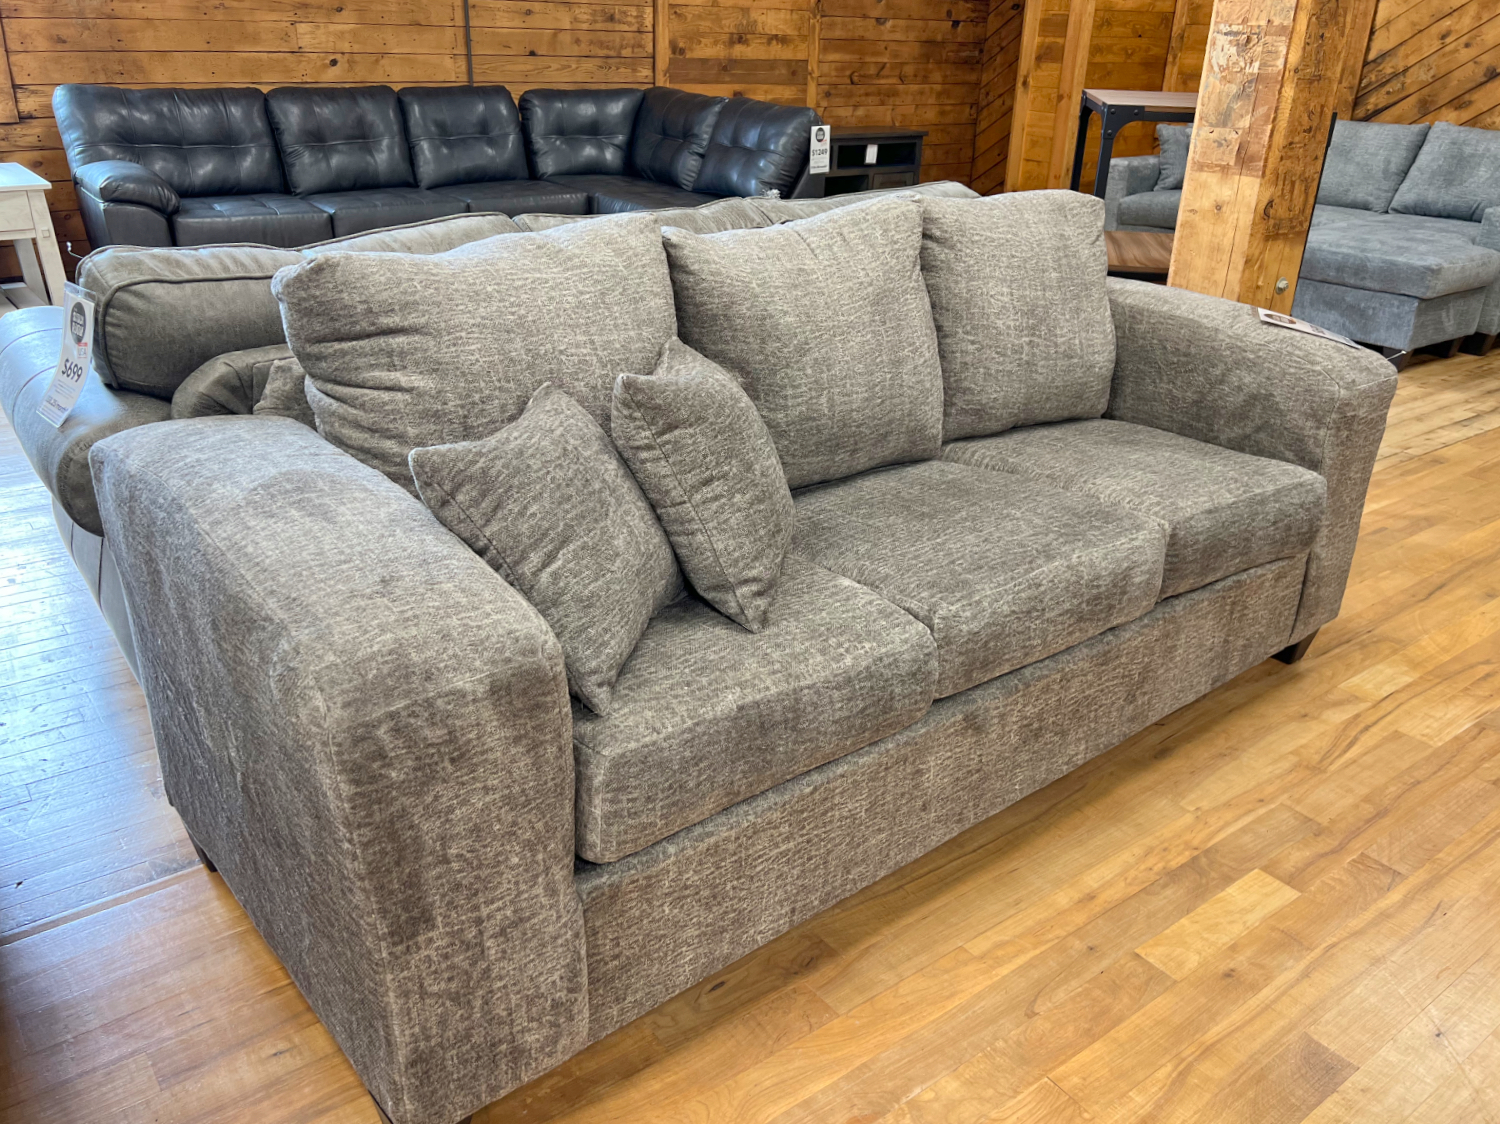 three seat sofa with extra wide track arms in cozy taupe fabric in the stock room furniture warehouse in rockford, il